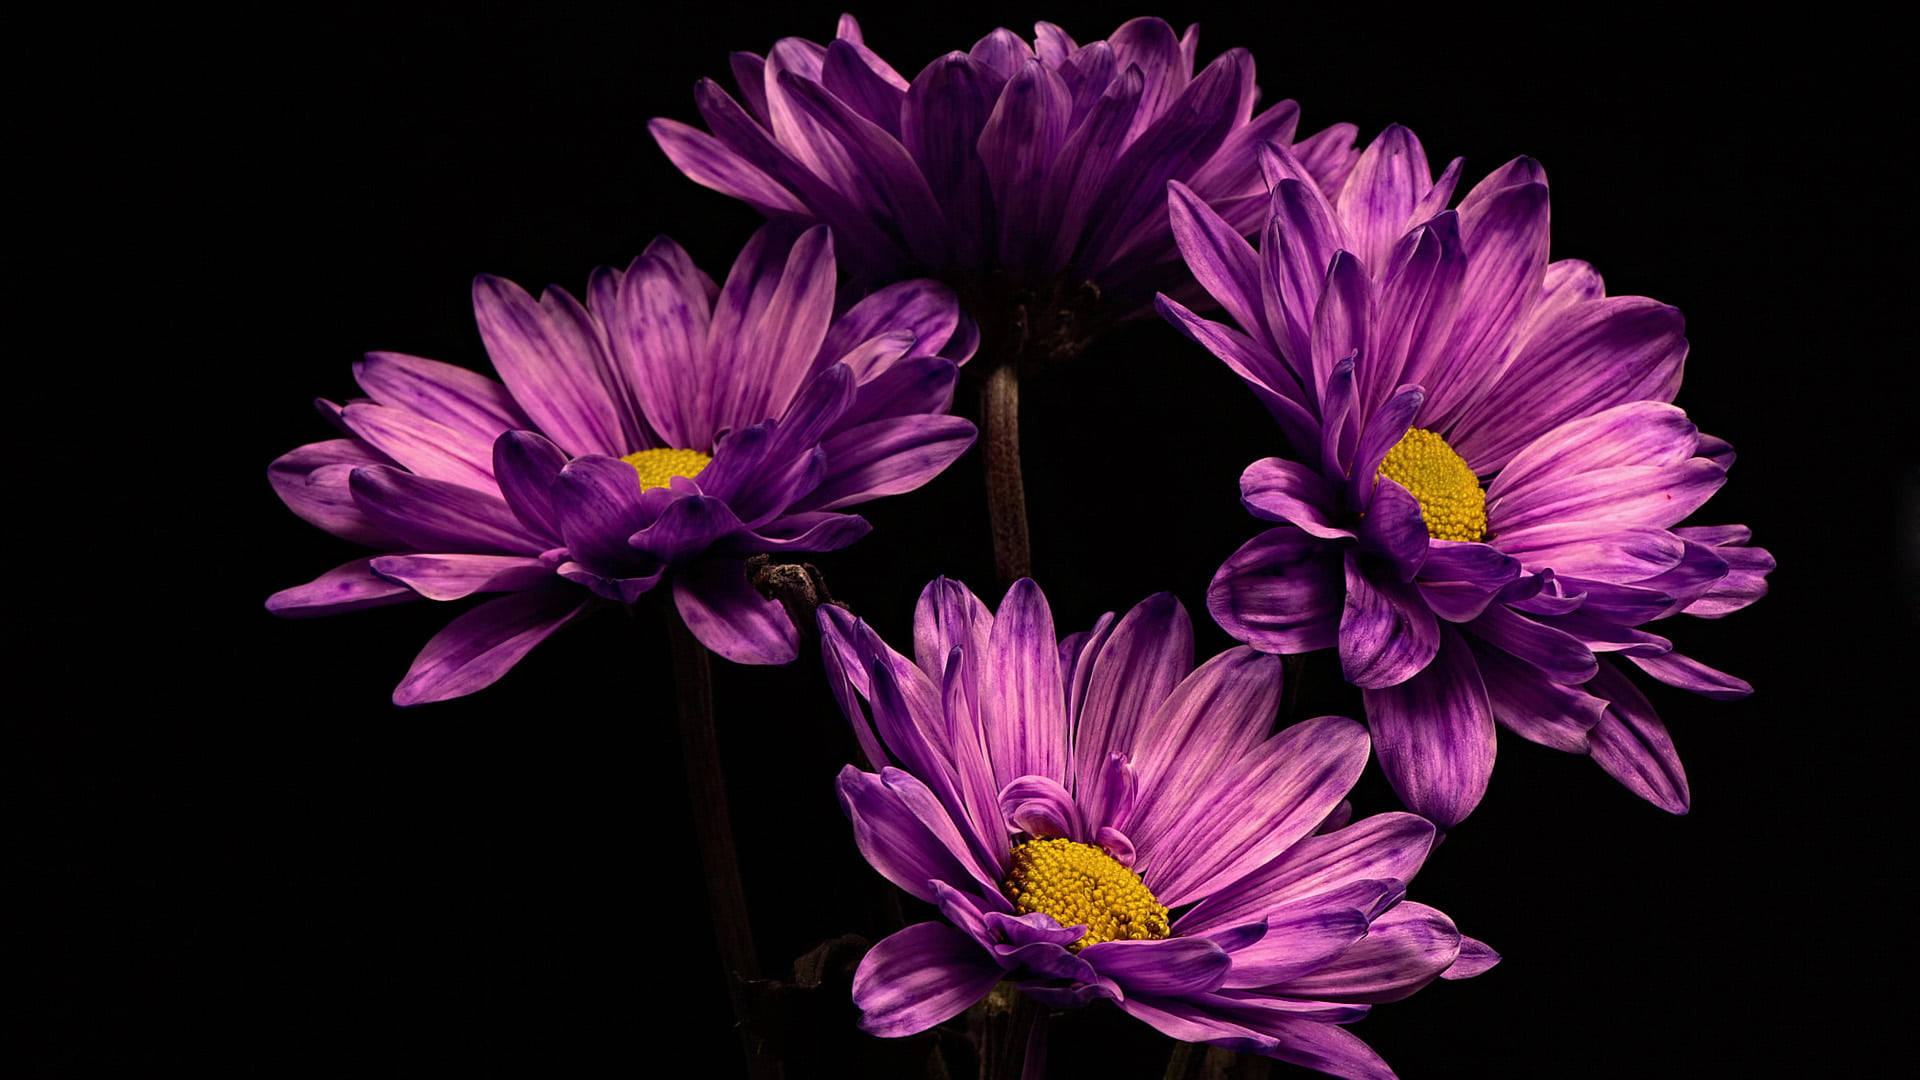 Four Black And Purple Flowers Wallpaper